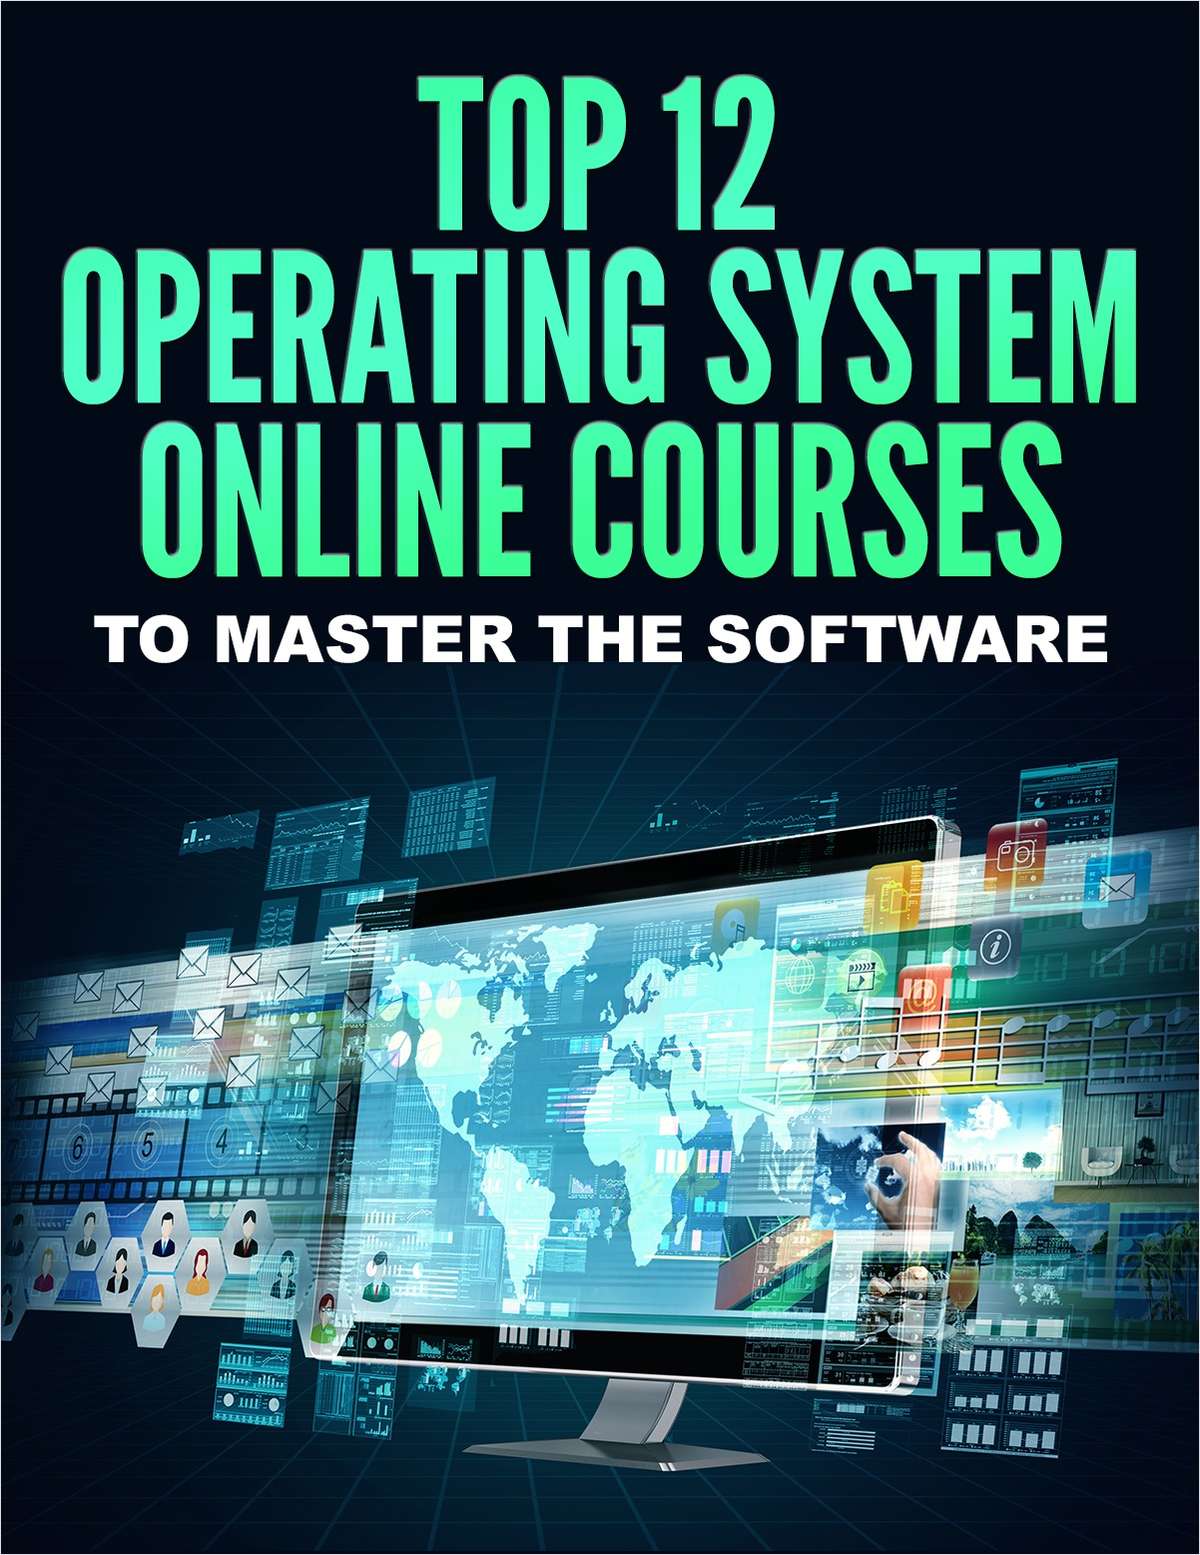 Top 12 Operating System Online Courses to Master the Software